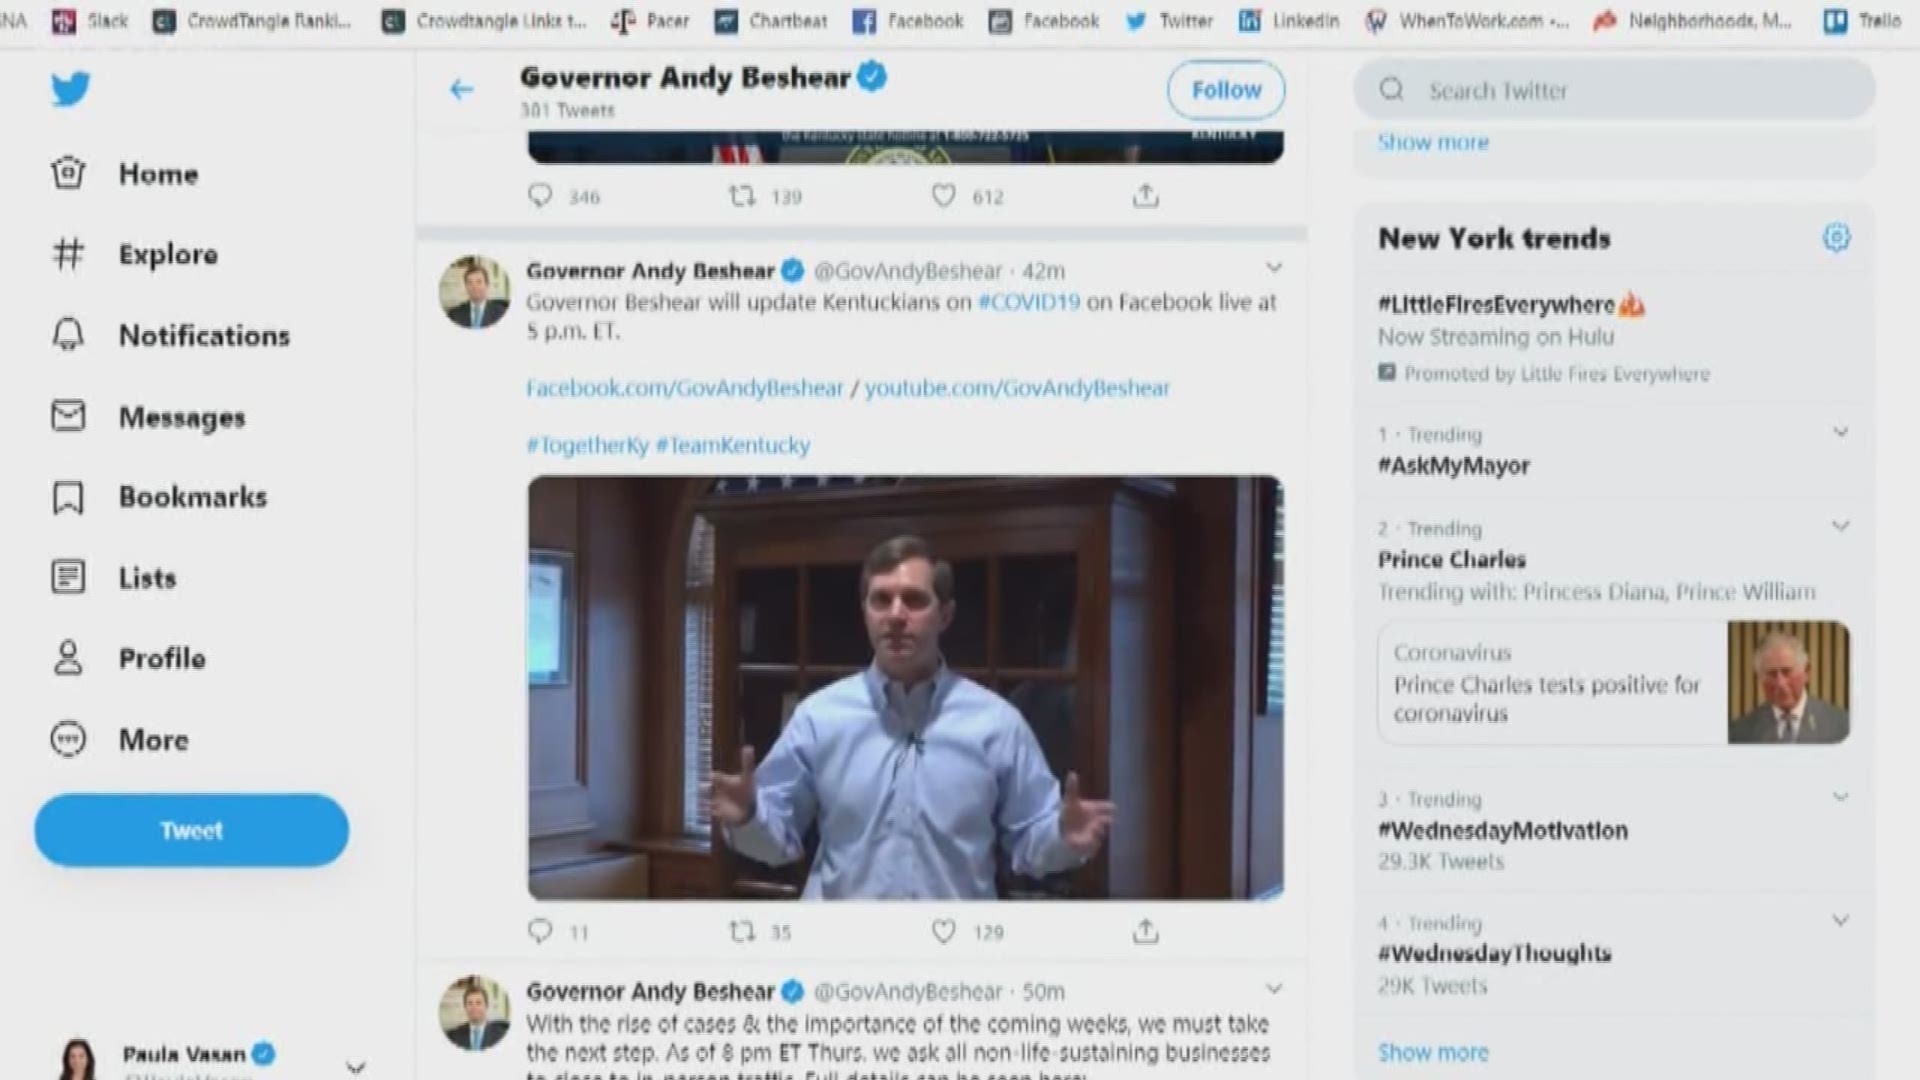 In a video posted to social media, Kentucky Governor Andy Beshear explains why he's temporarily shutting down all non-life sustaining or non-essential businesses,